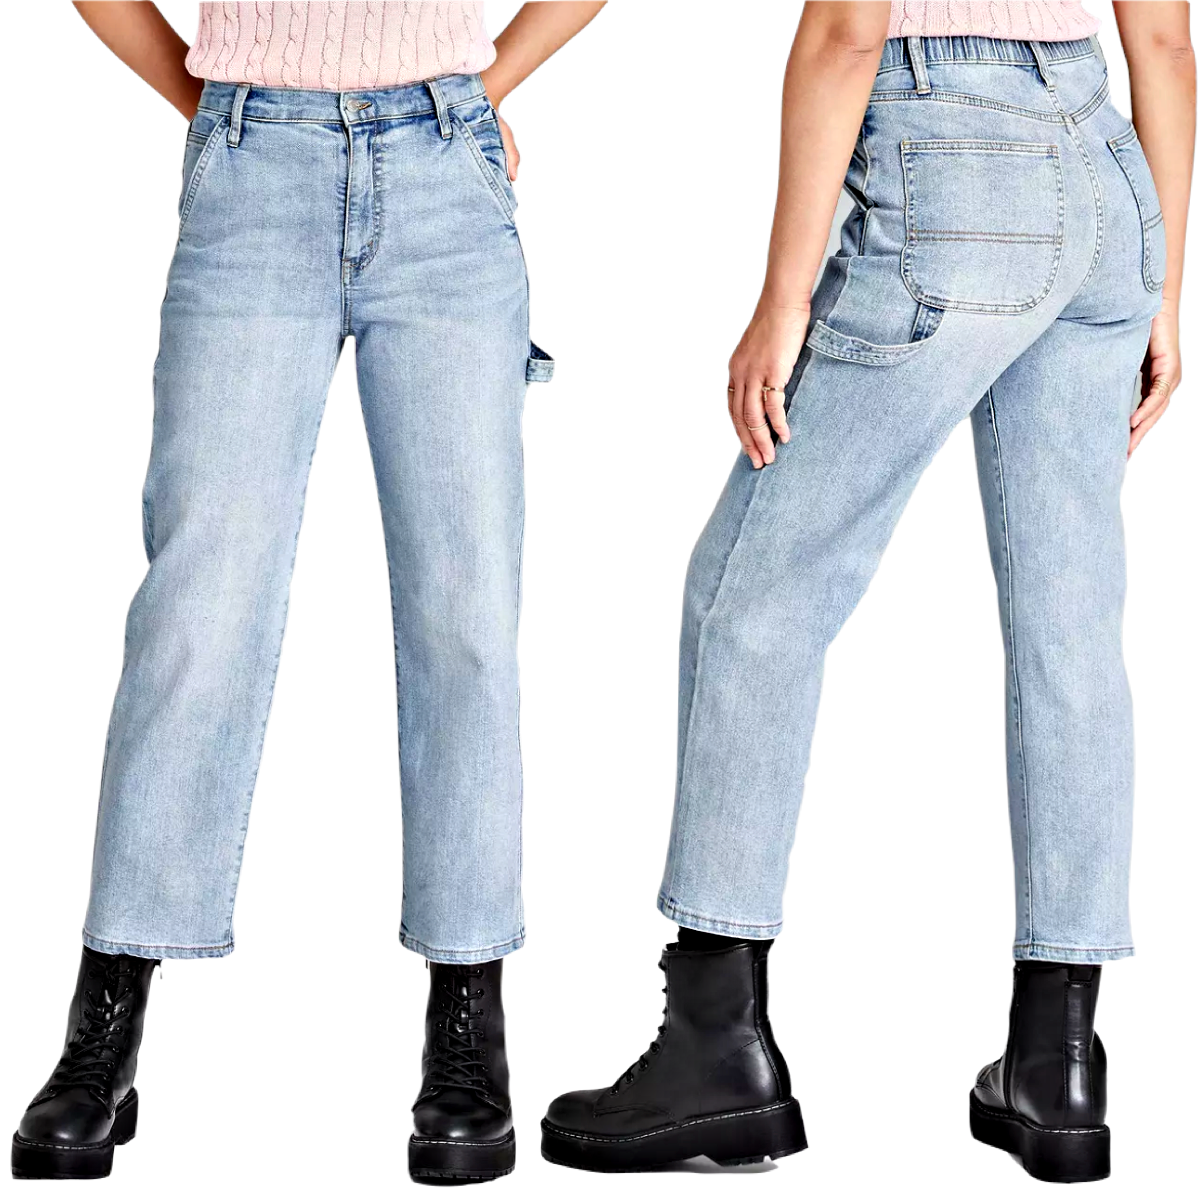 The Viral $25 TikTok Jeans Are Almost Sold Out—Get It Before It's Gone